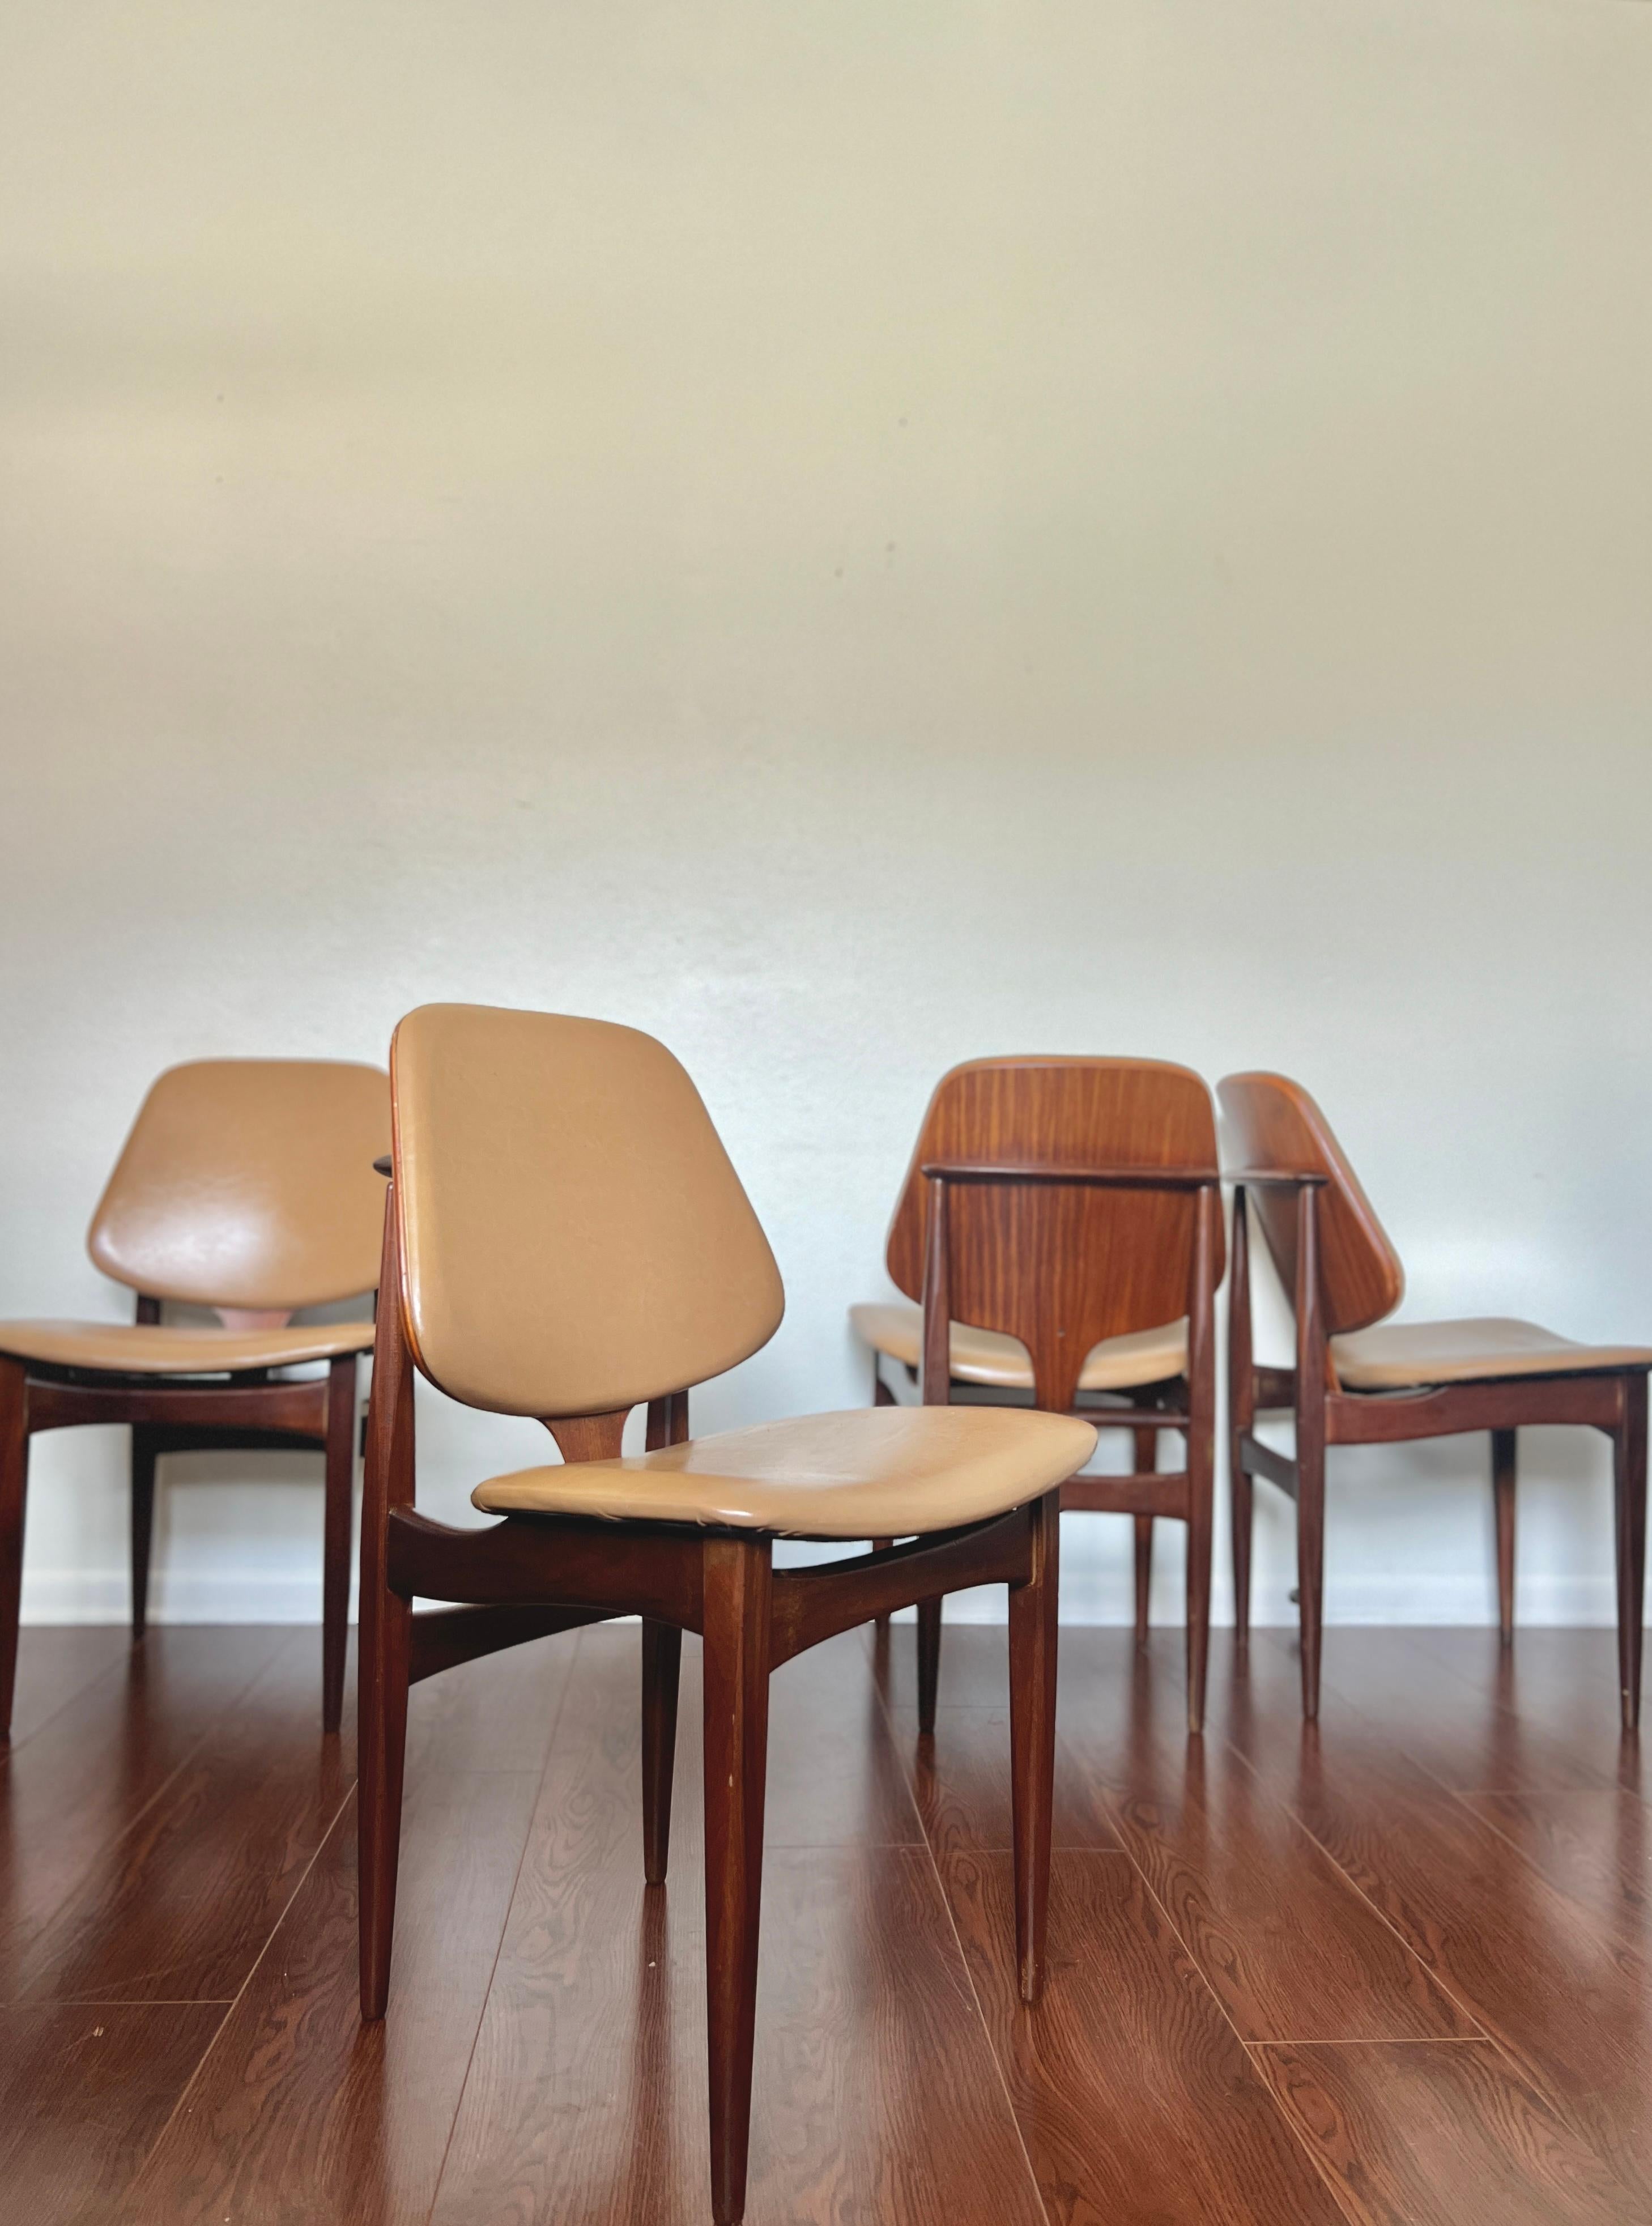 A set of 4 mid century modern dining chairs by Elliots of Newbury 3